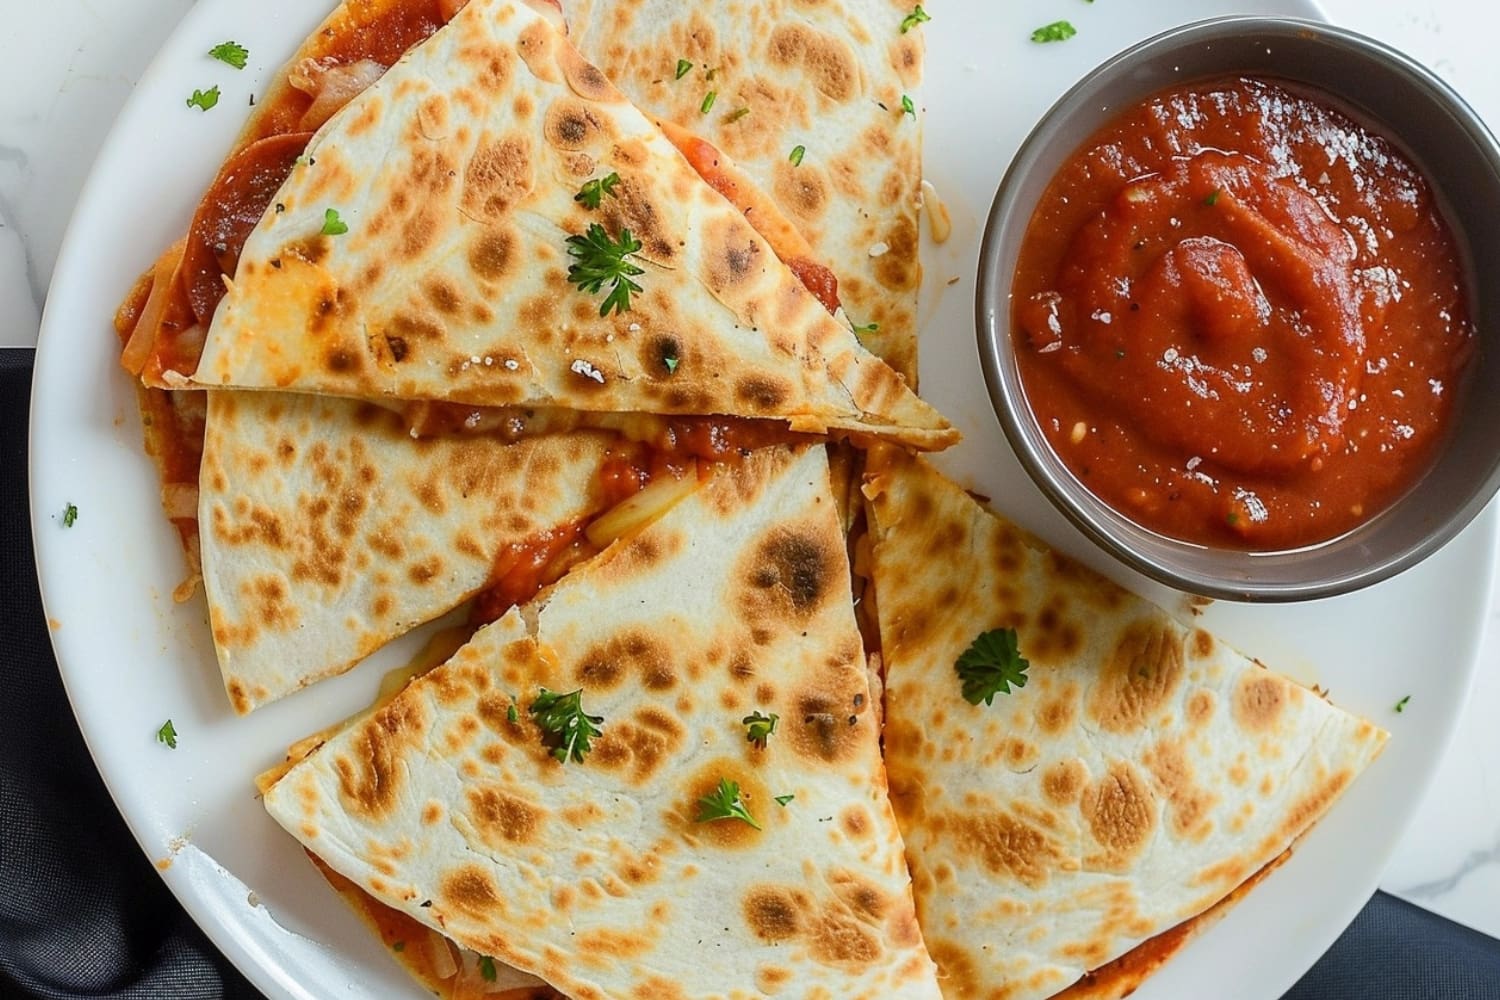 Sliced pizza quesadillas on a plate with sauce